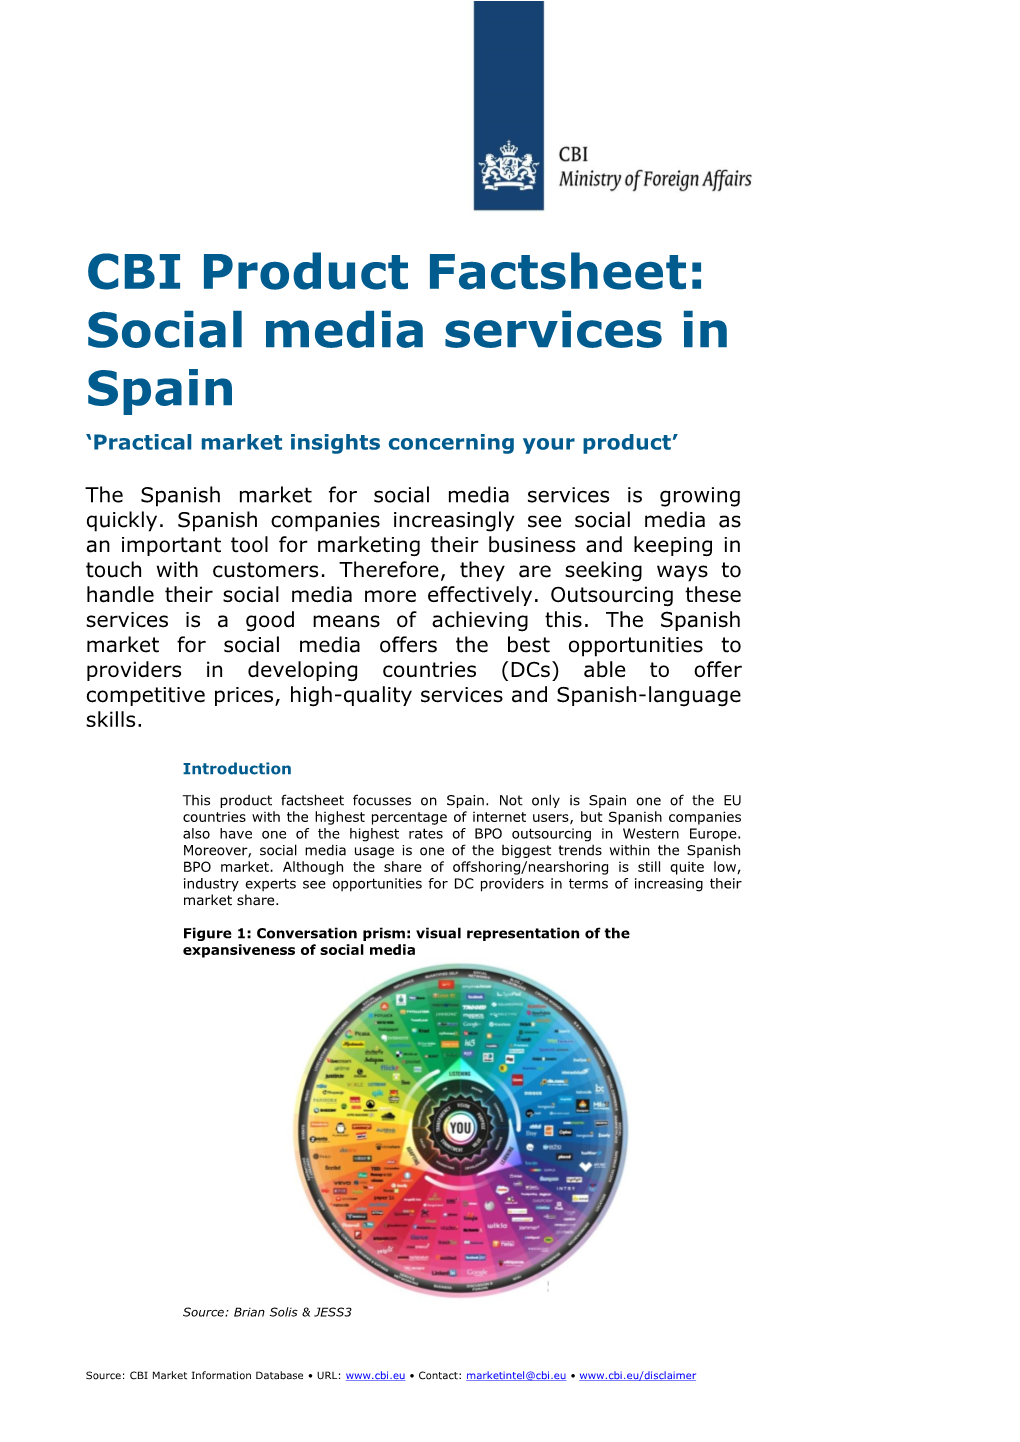 Social Media Services in Spain ‘Practical Market Insights Concerning Your Product’